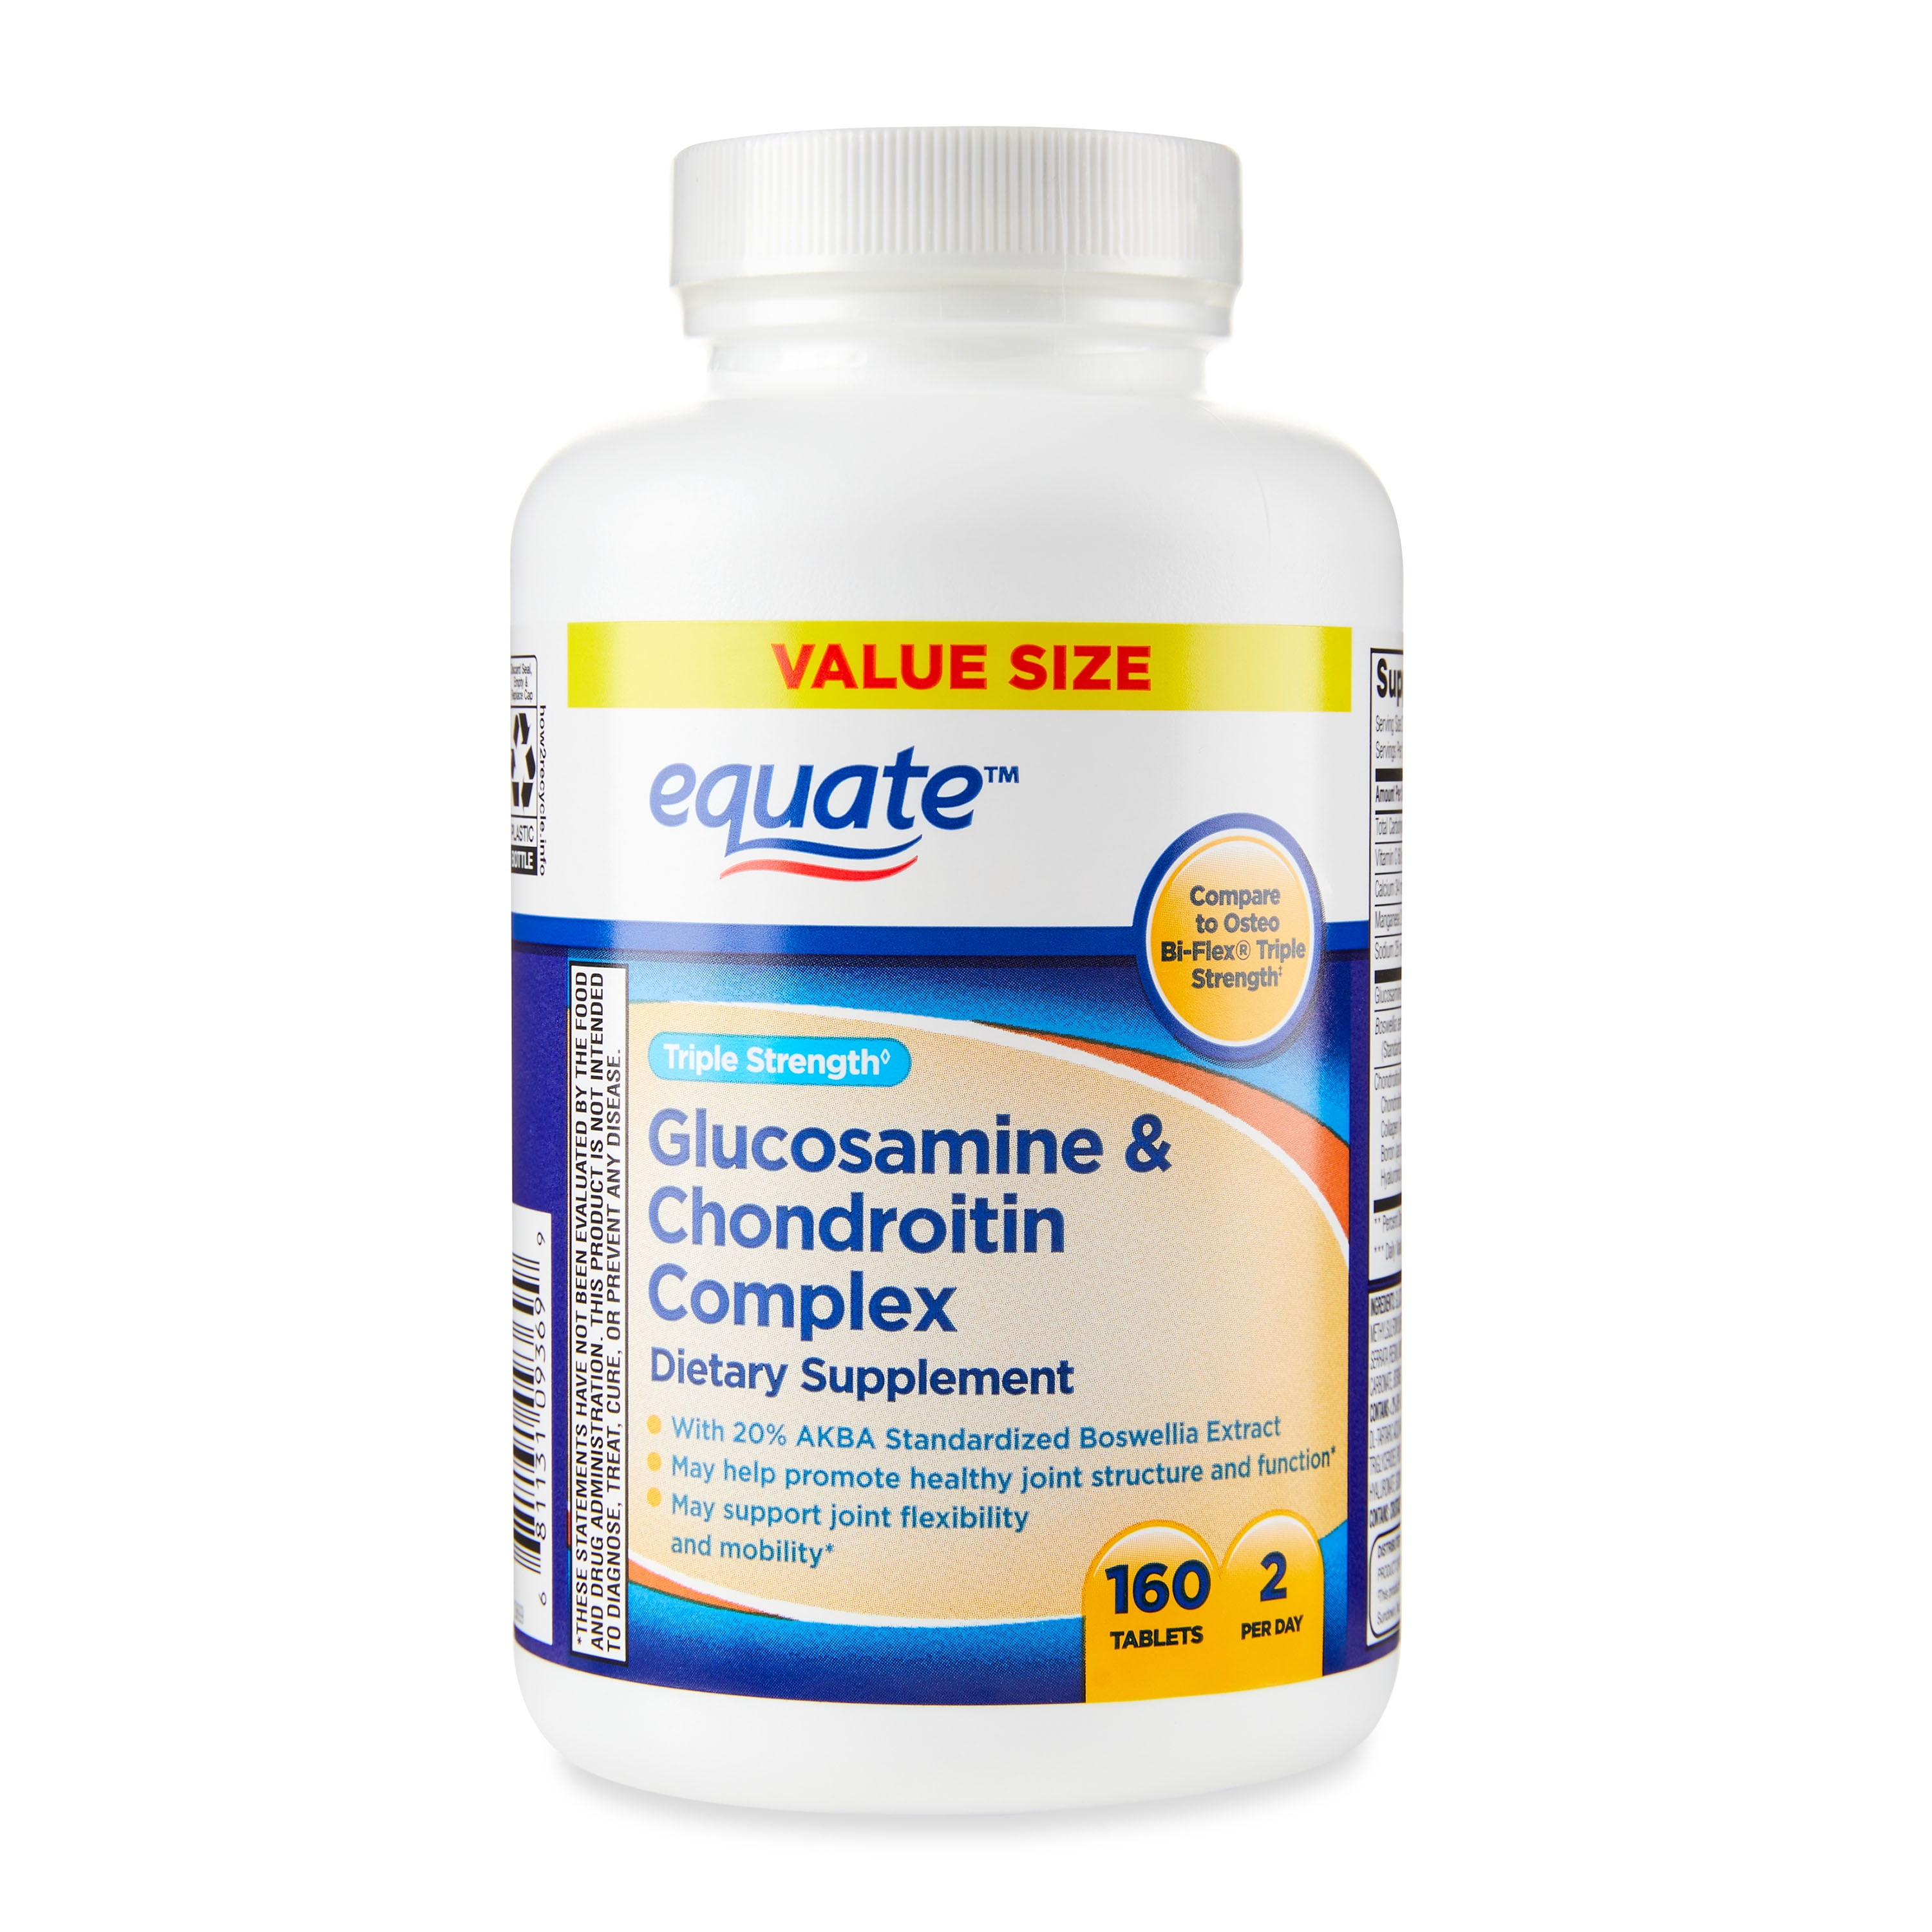 Equate Triple Strength Glucosamine & Chondroitin Complex Tablets Dietary Supplement Value Size, 160 Count